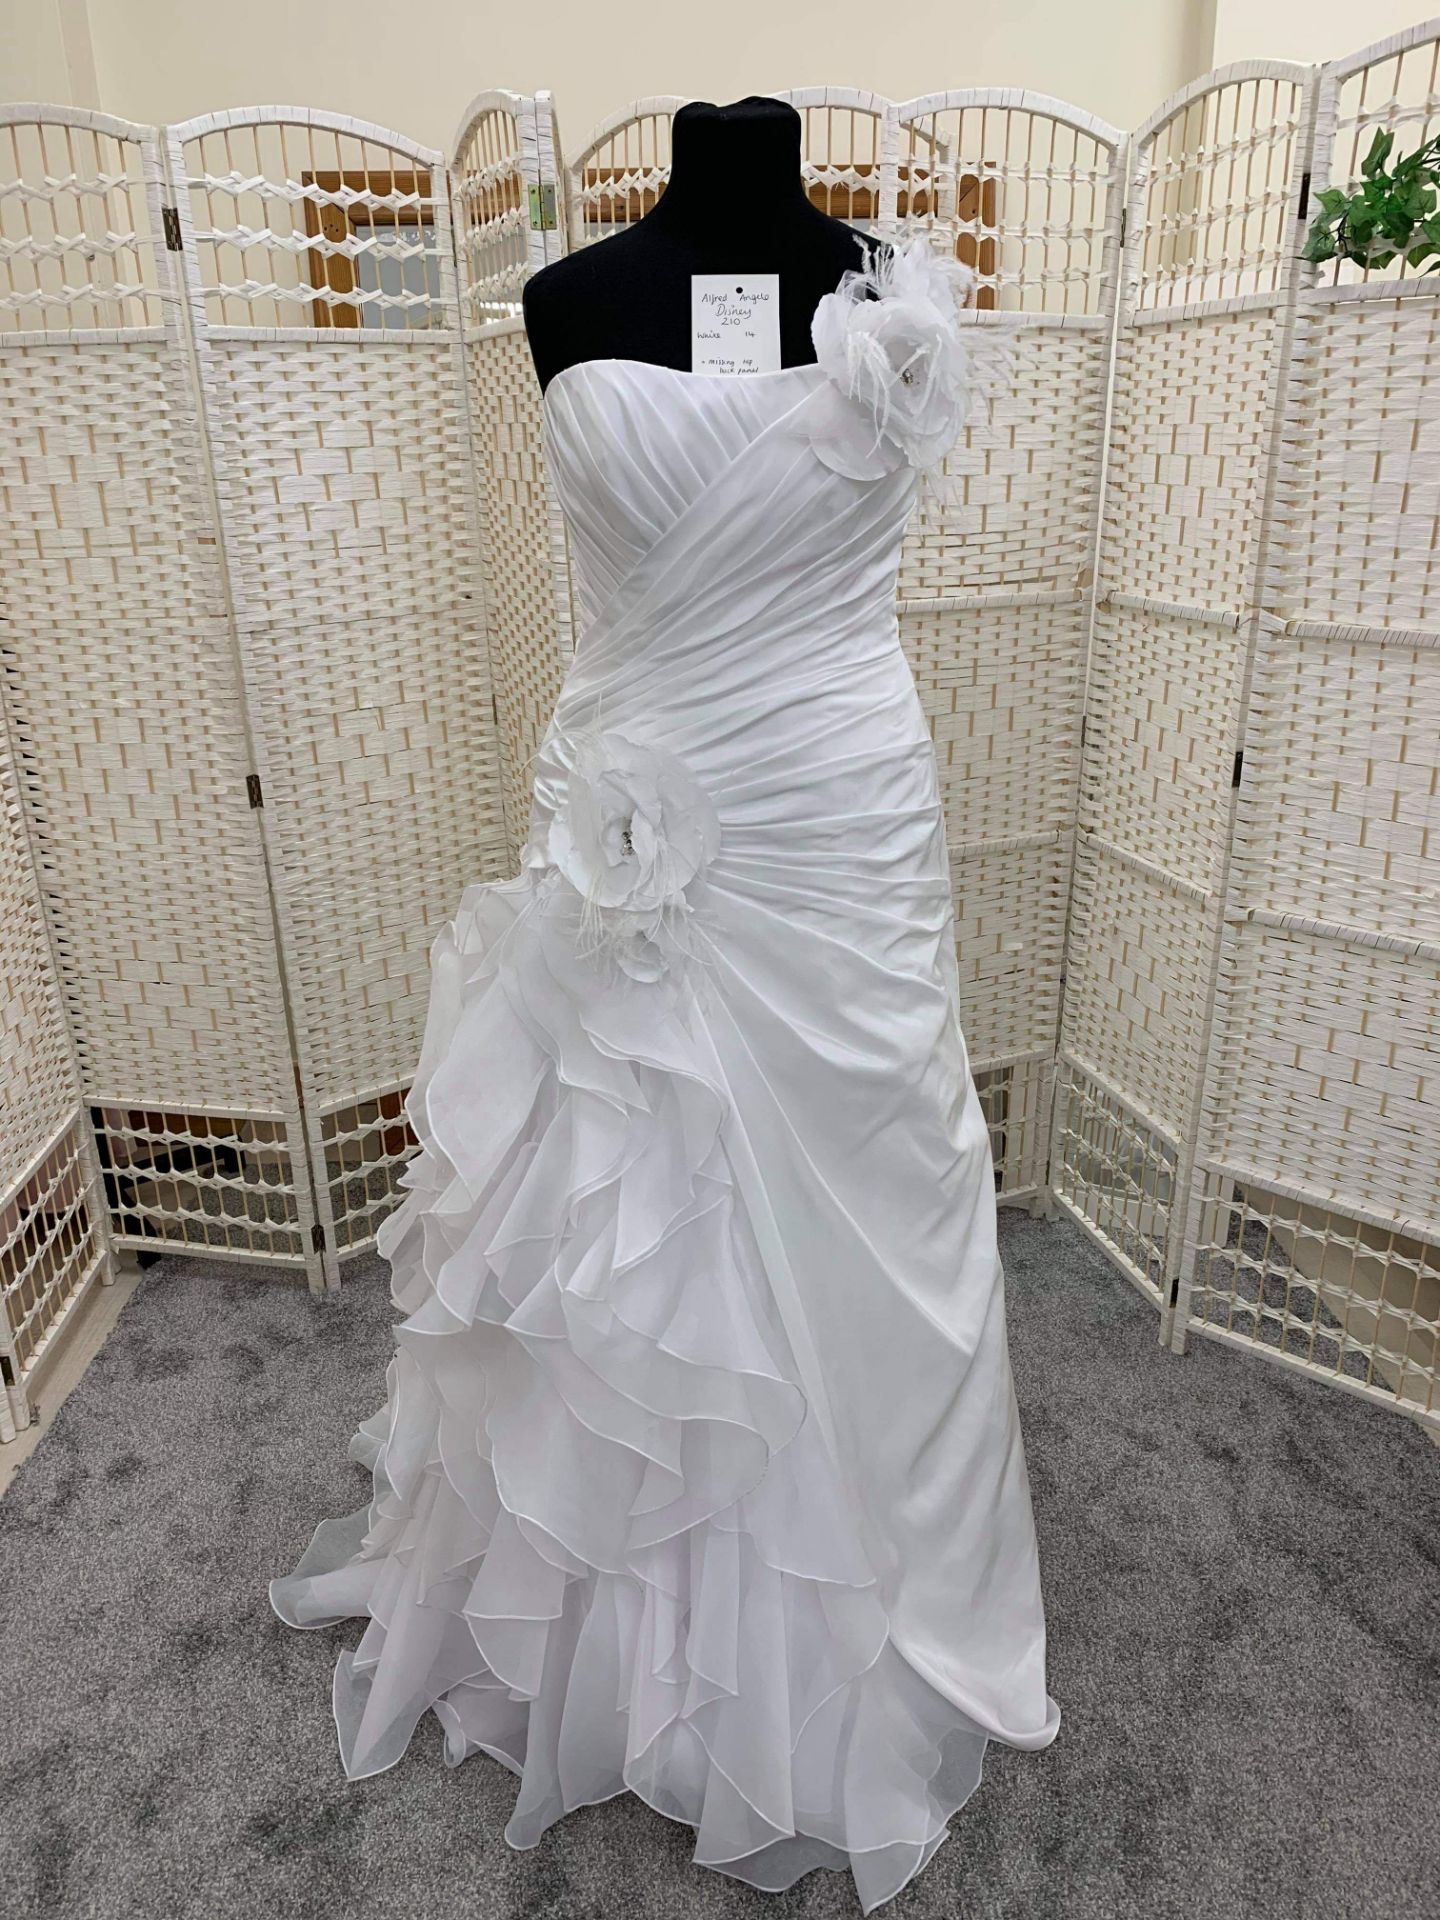 Disney Fairytale Weddings Princess Bridal Collection. Ivory Wedding Dress in Size 12-14. - Image 2 of 2